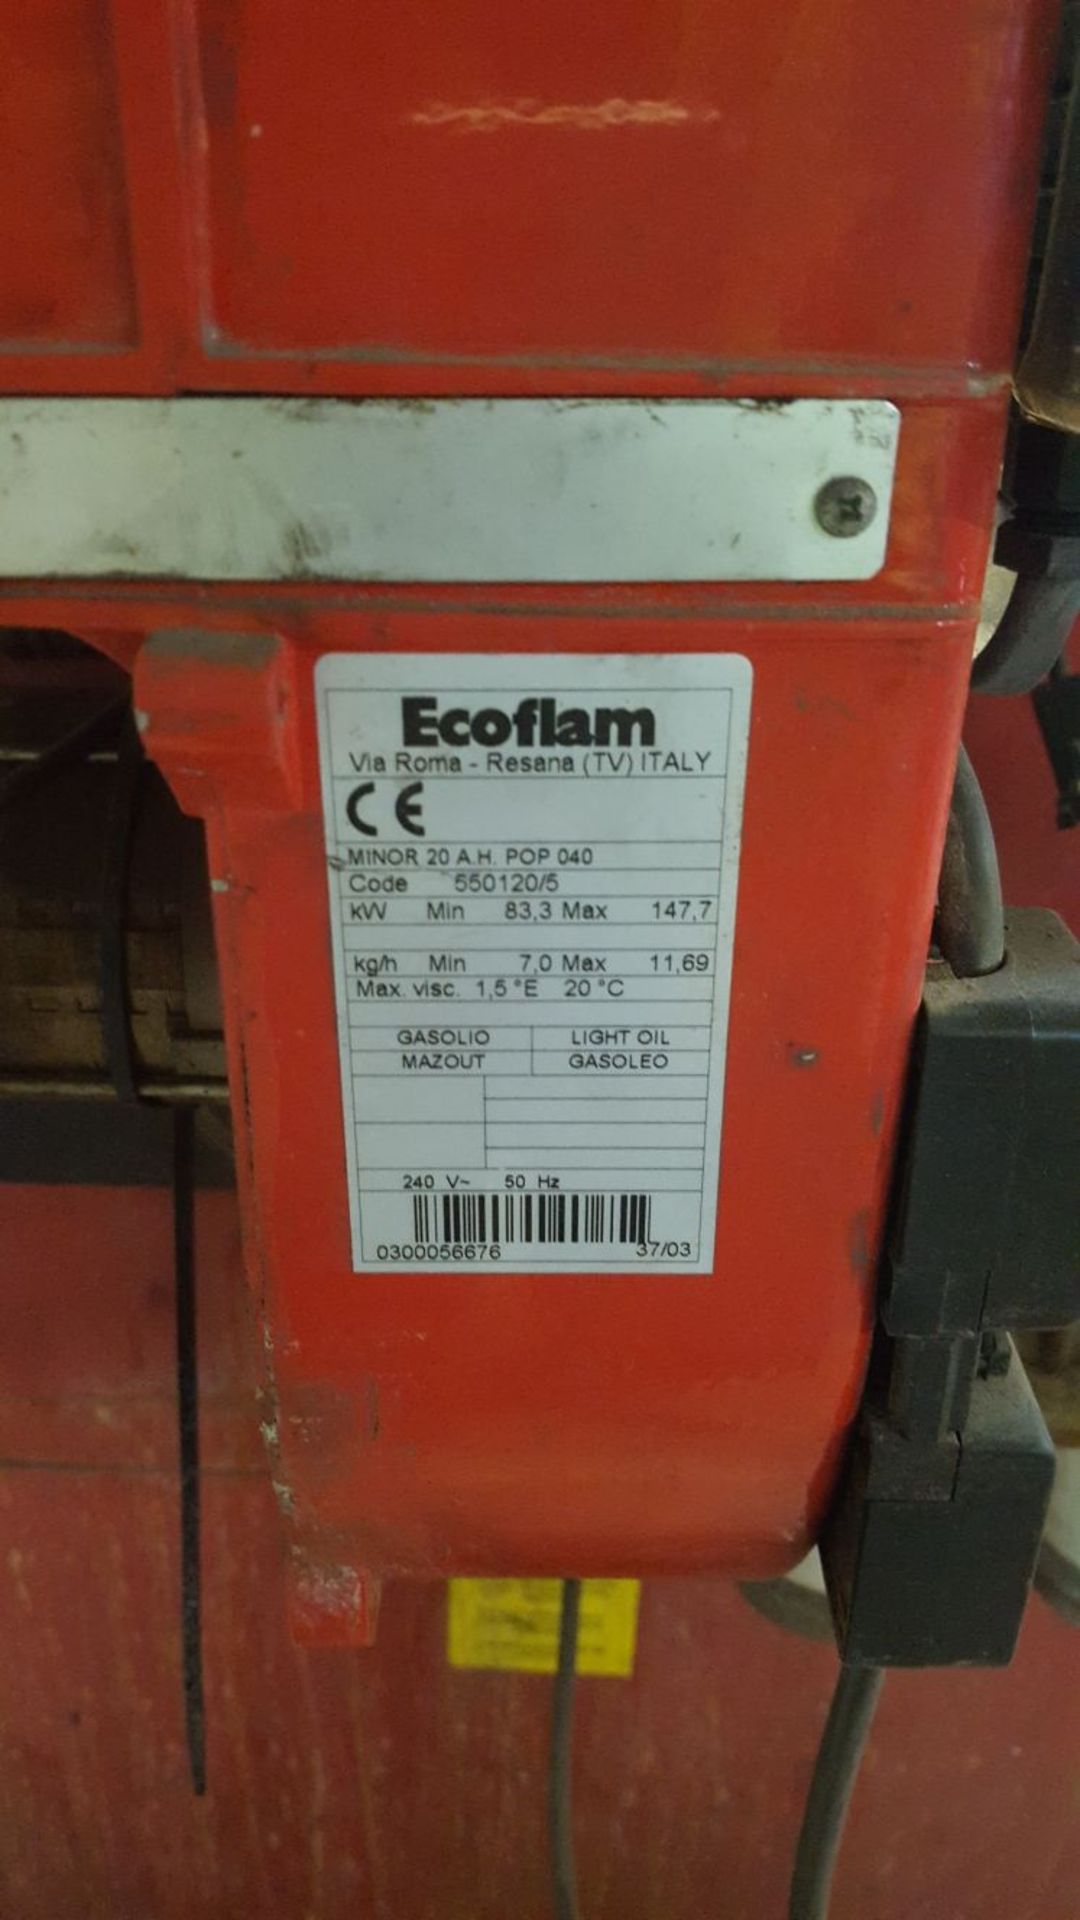 WORKSHOP HEATER, RUNS ON PARAFFIN / HEATING OIL, RECENTLY REMOVED FROM A WORKING WORKSHOP *PLUS VAT* - Image 3 of 4